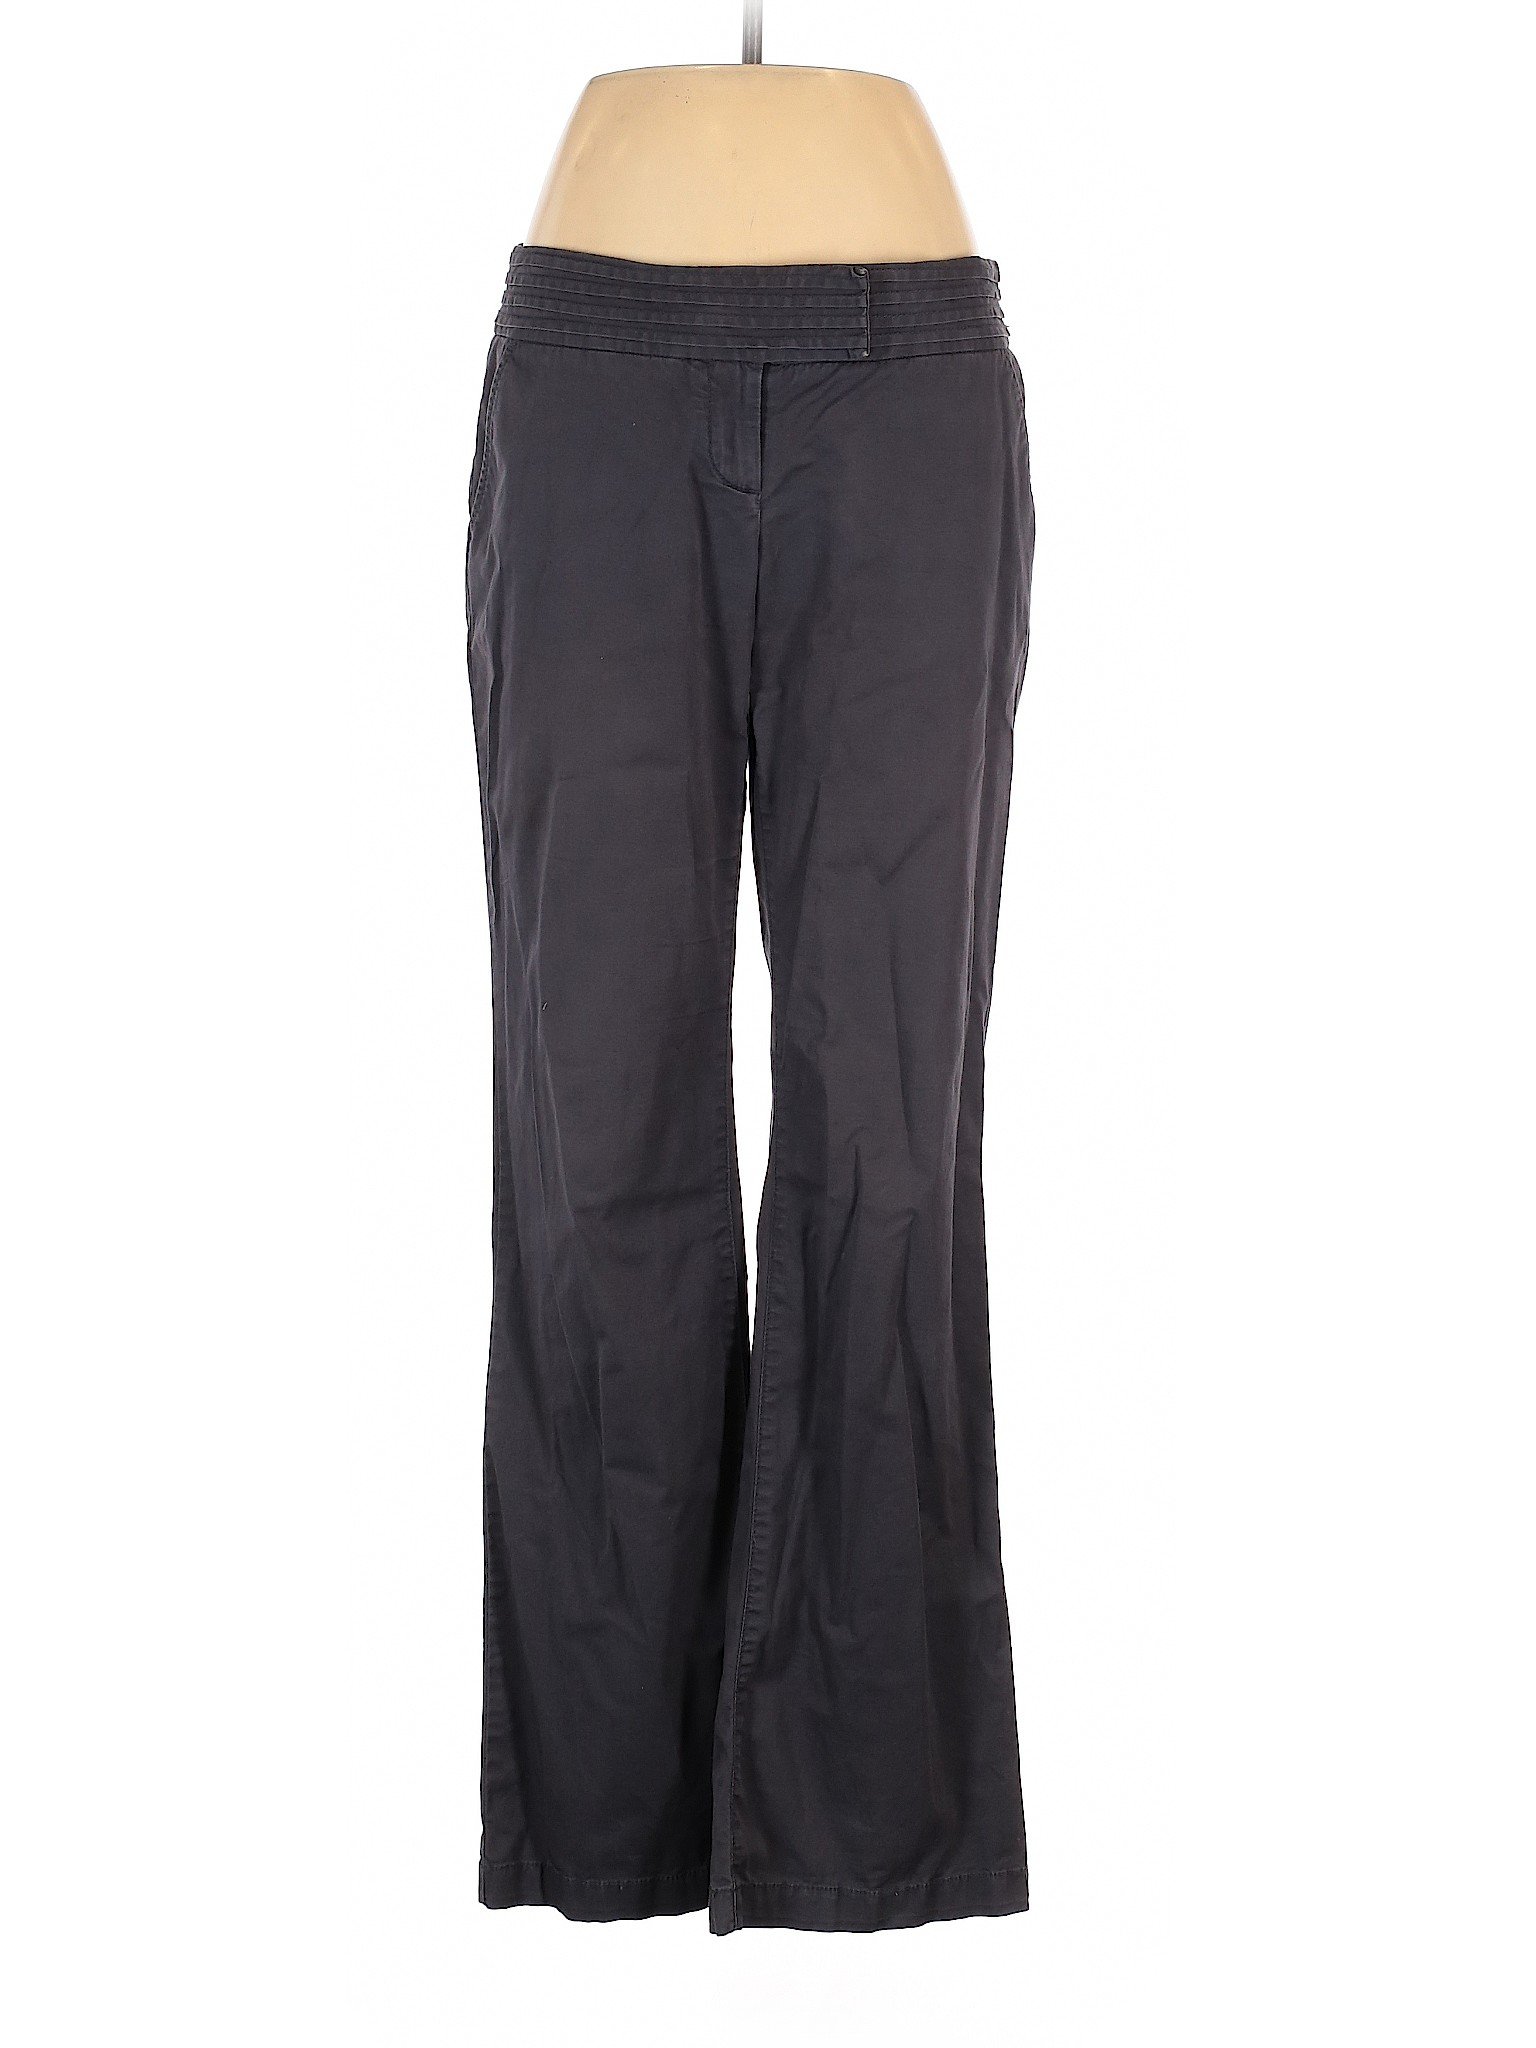 The Limited Women Black Casual Pants 8 | eBay